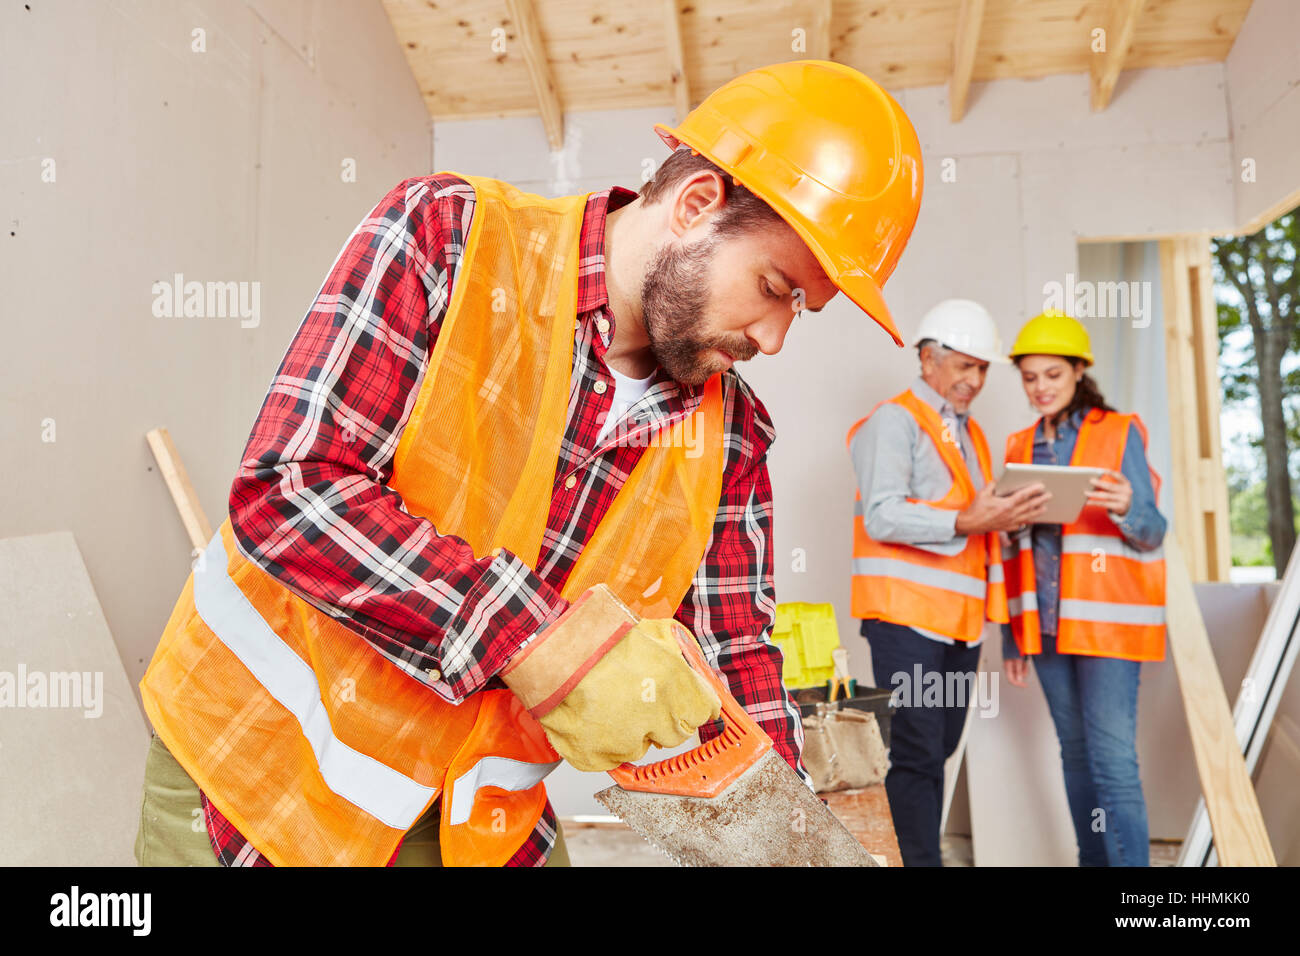 Skilled carpenter working with wood with concentration Stock Photo